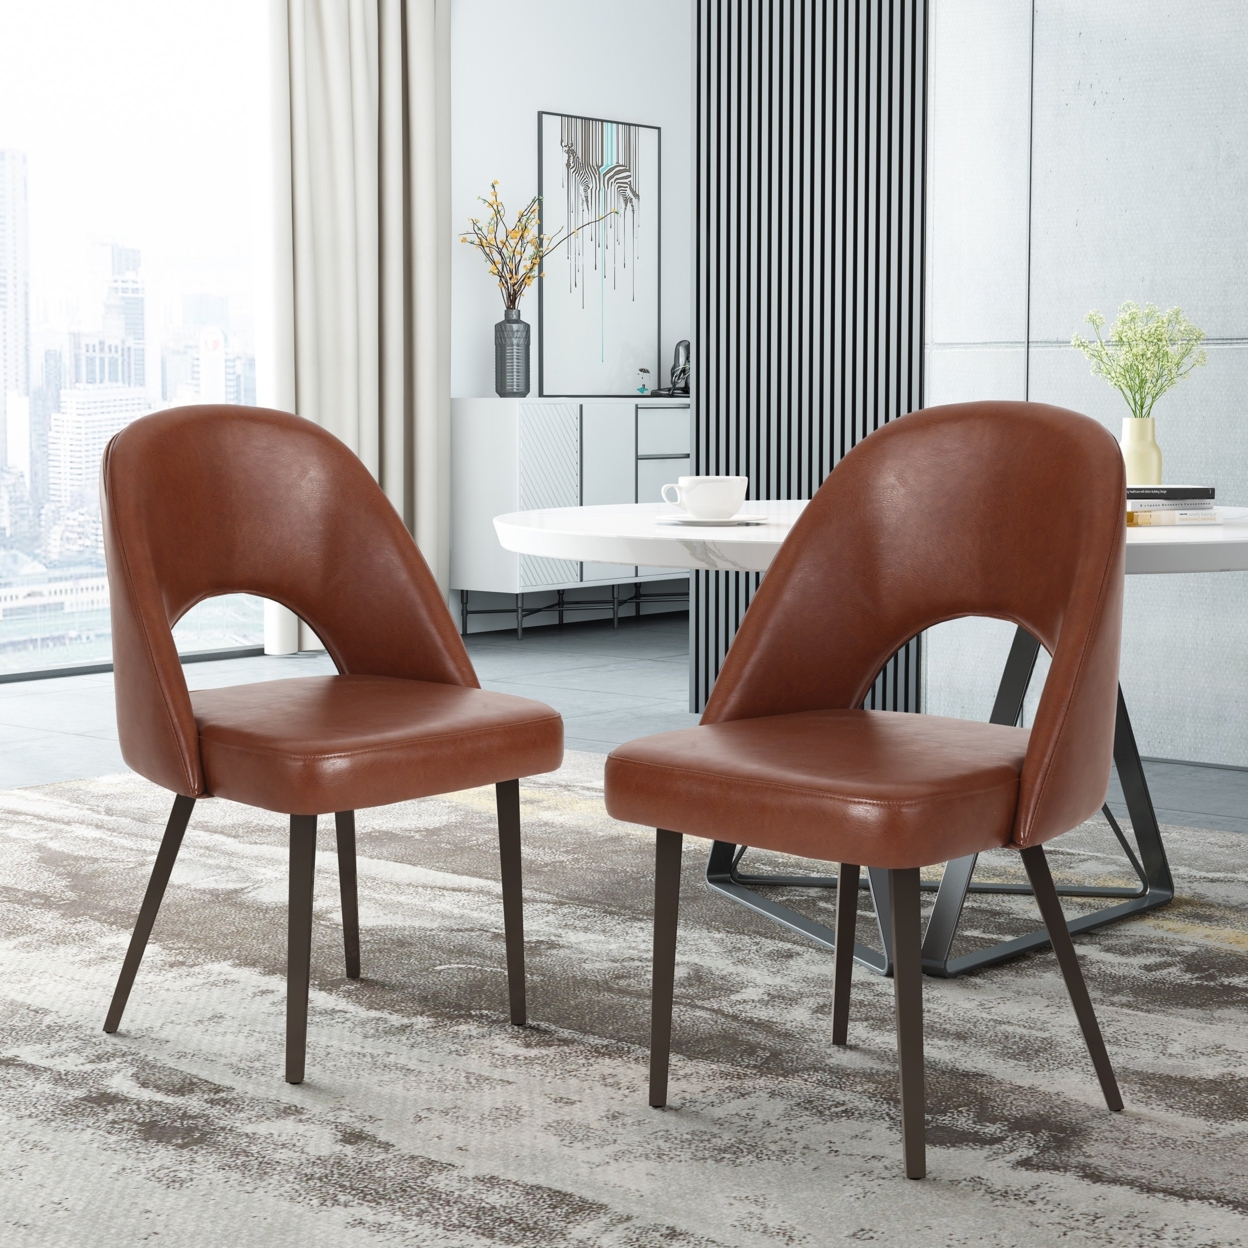 Odum Abbeville Contemporary Open Back Dining Chairs, Set Of 2 - Light Brown/gun Metal